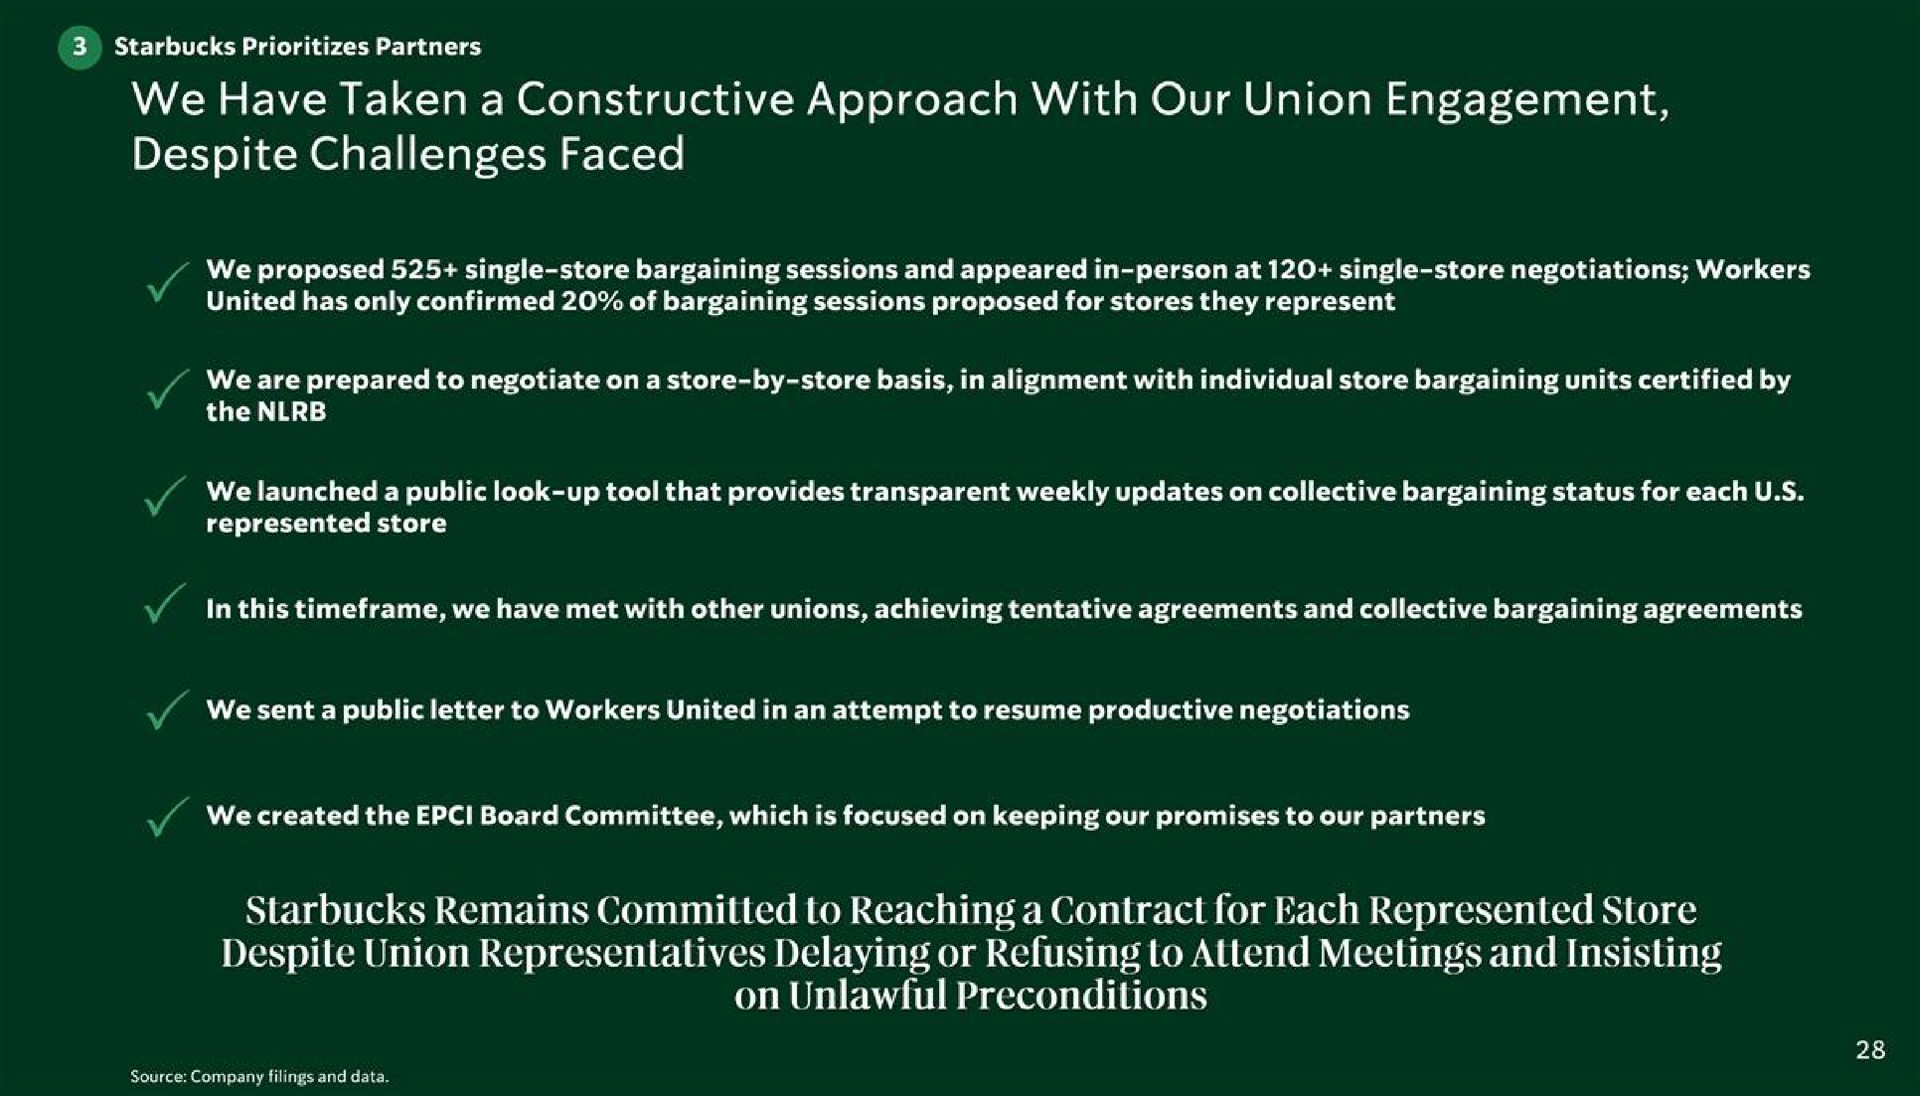 we have taken a constructive approach with our union engagement despite challenges faced remains committed to reaching a contract for each represented store despite union representatives delaying or refusing to attend meetings and insisting on unlawful preconditions | Starbucks